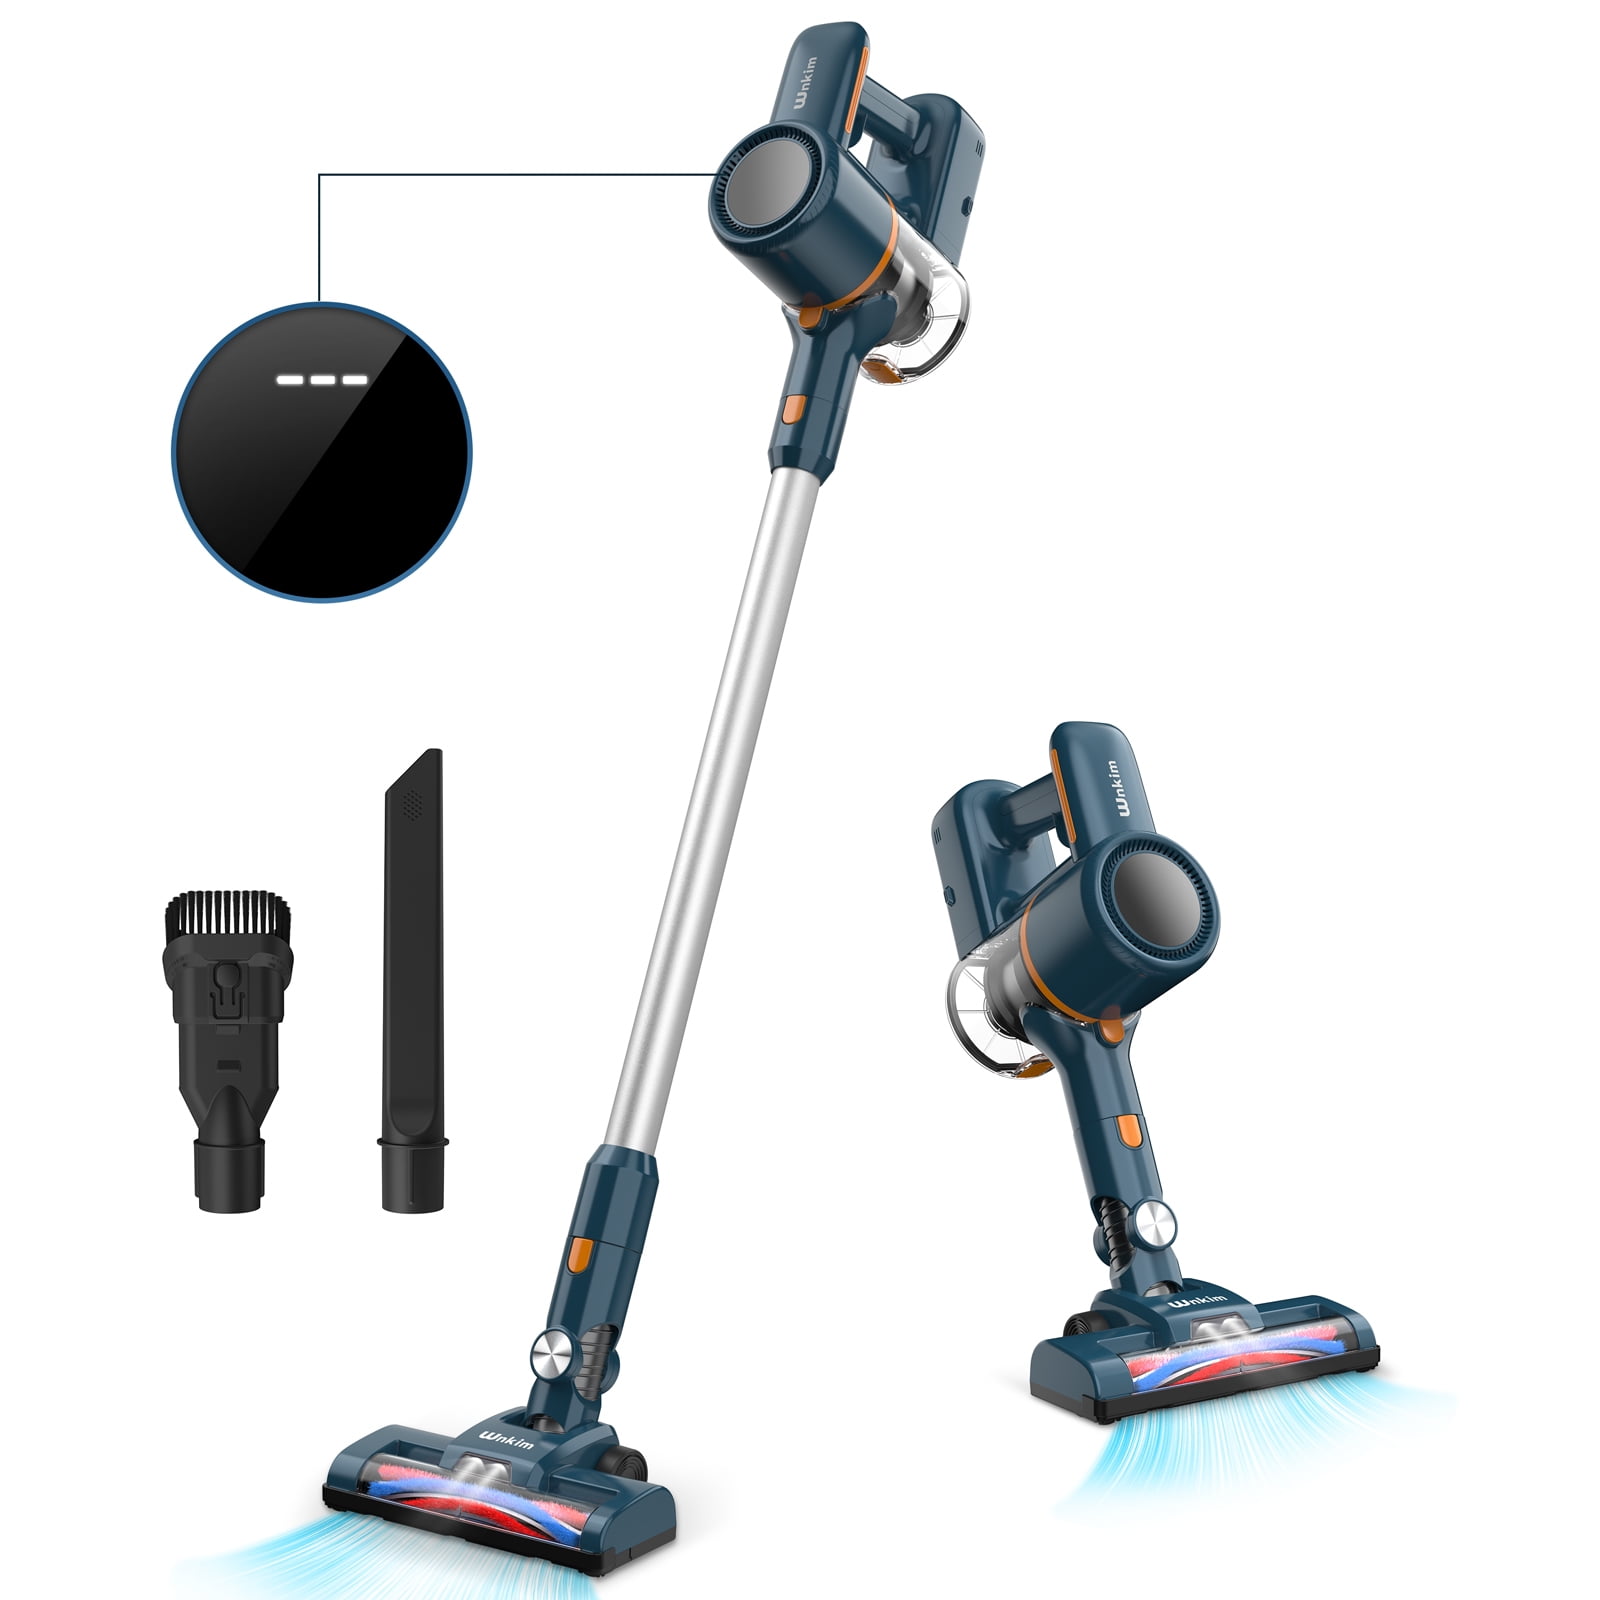 2-IN-1 Cordless Stick and Hand Vacuum - Clean Smarter, Not Harder 